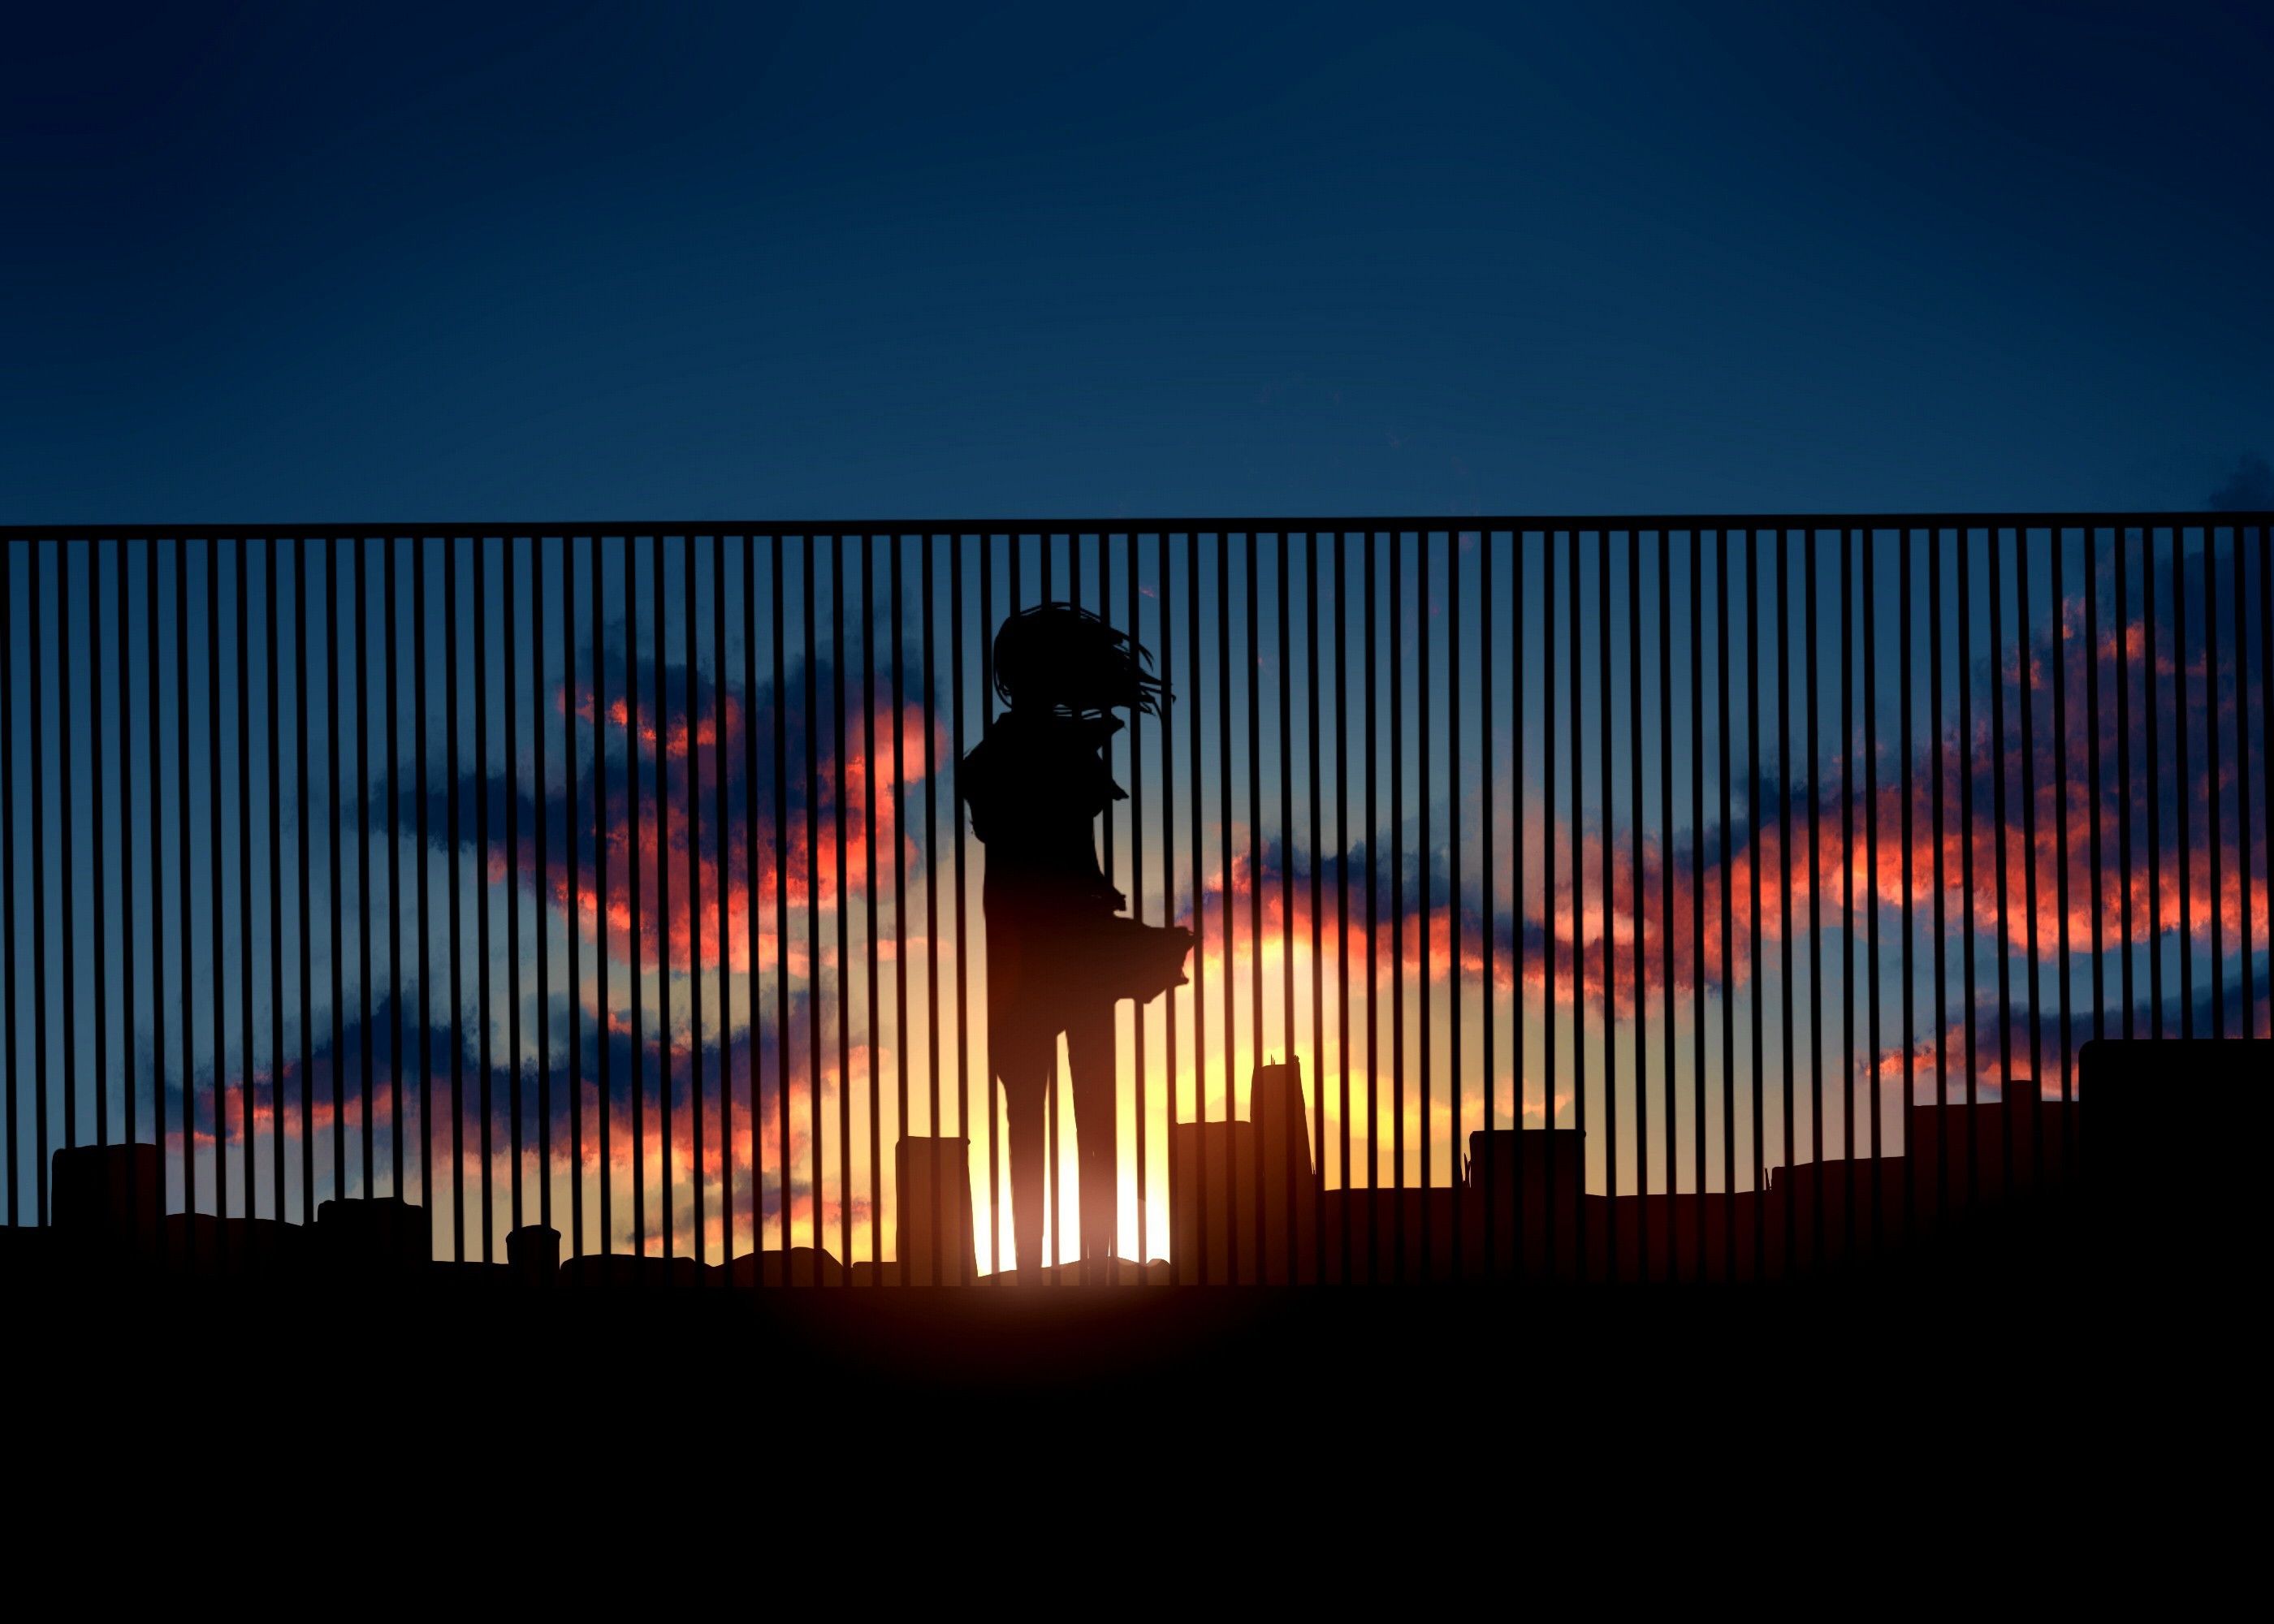 Anime style wallpaper. Girl looking at the peaceful sunset